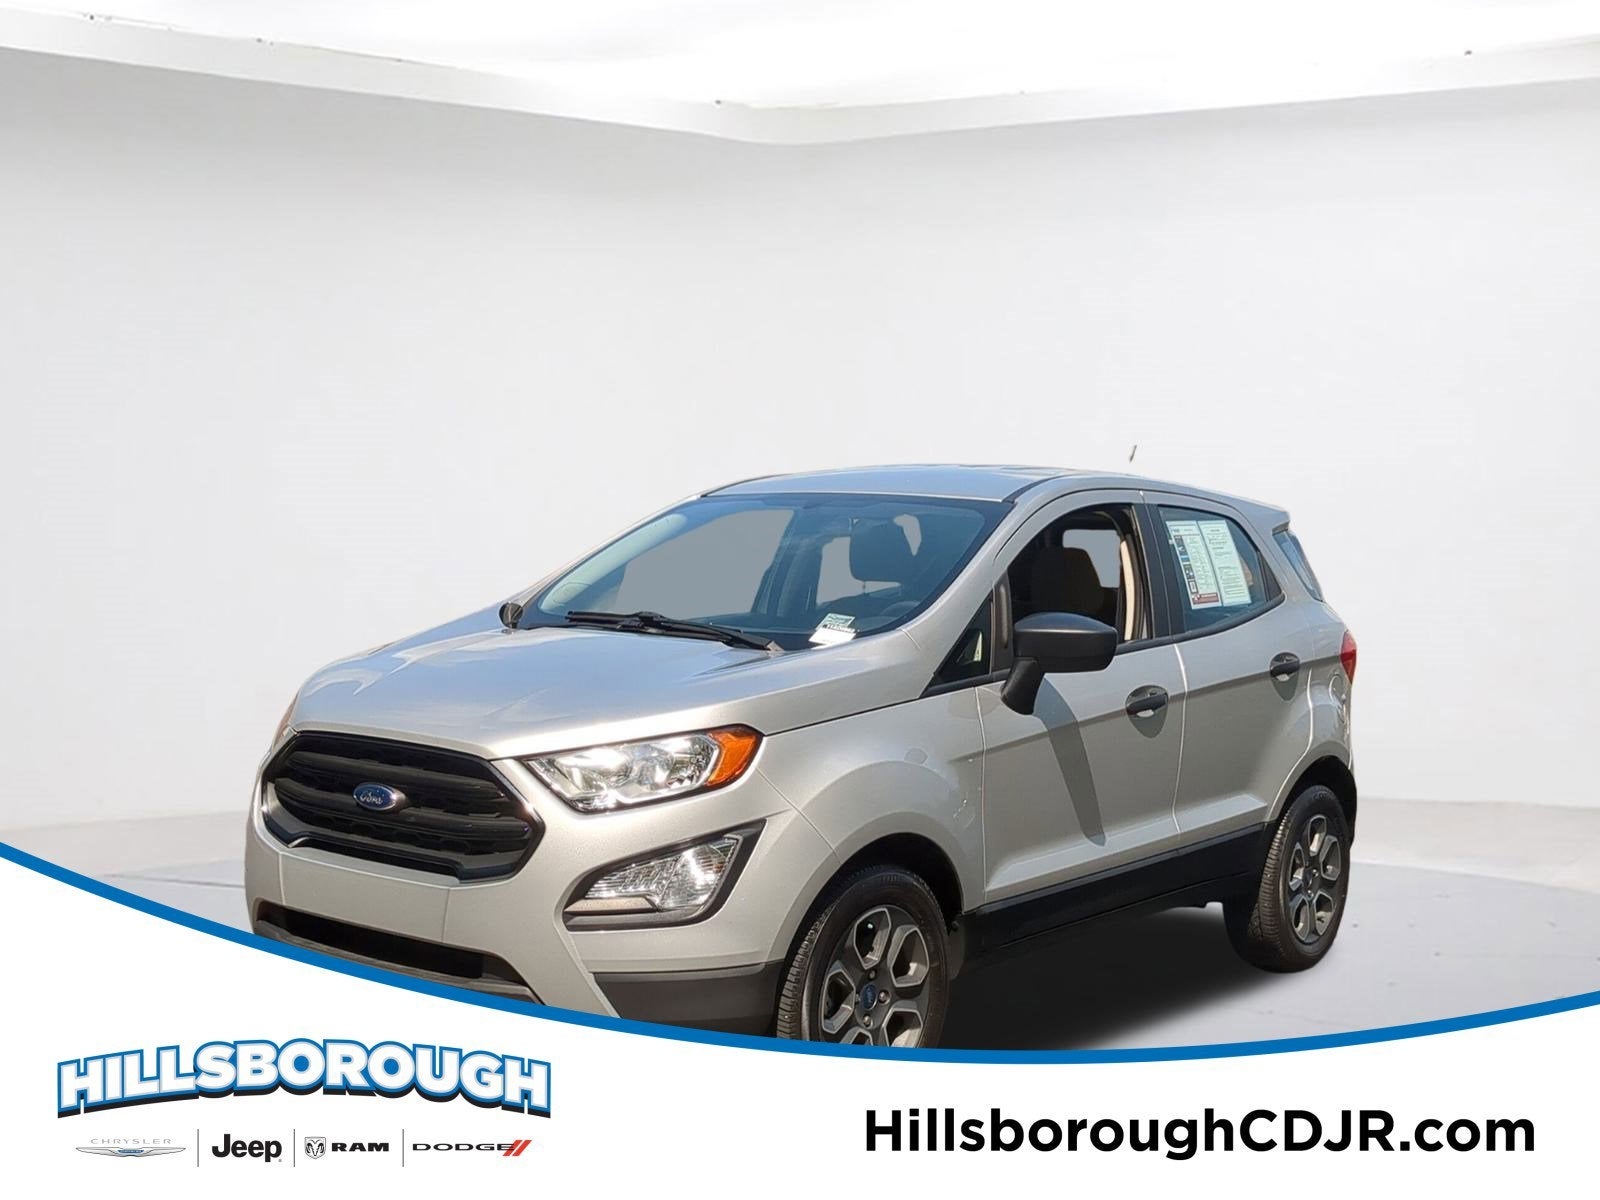 2021 Ford EcoSport S